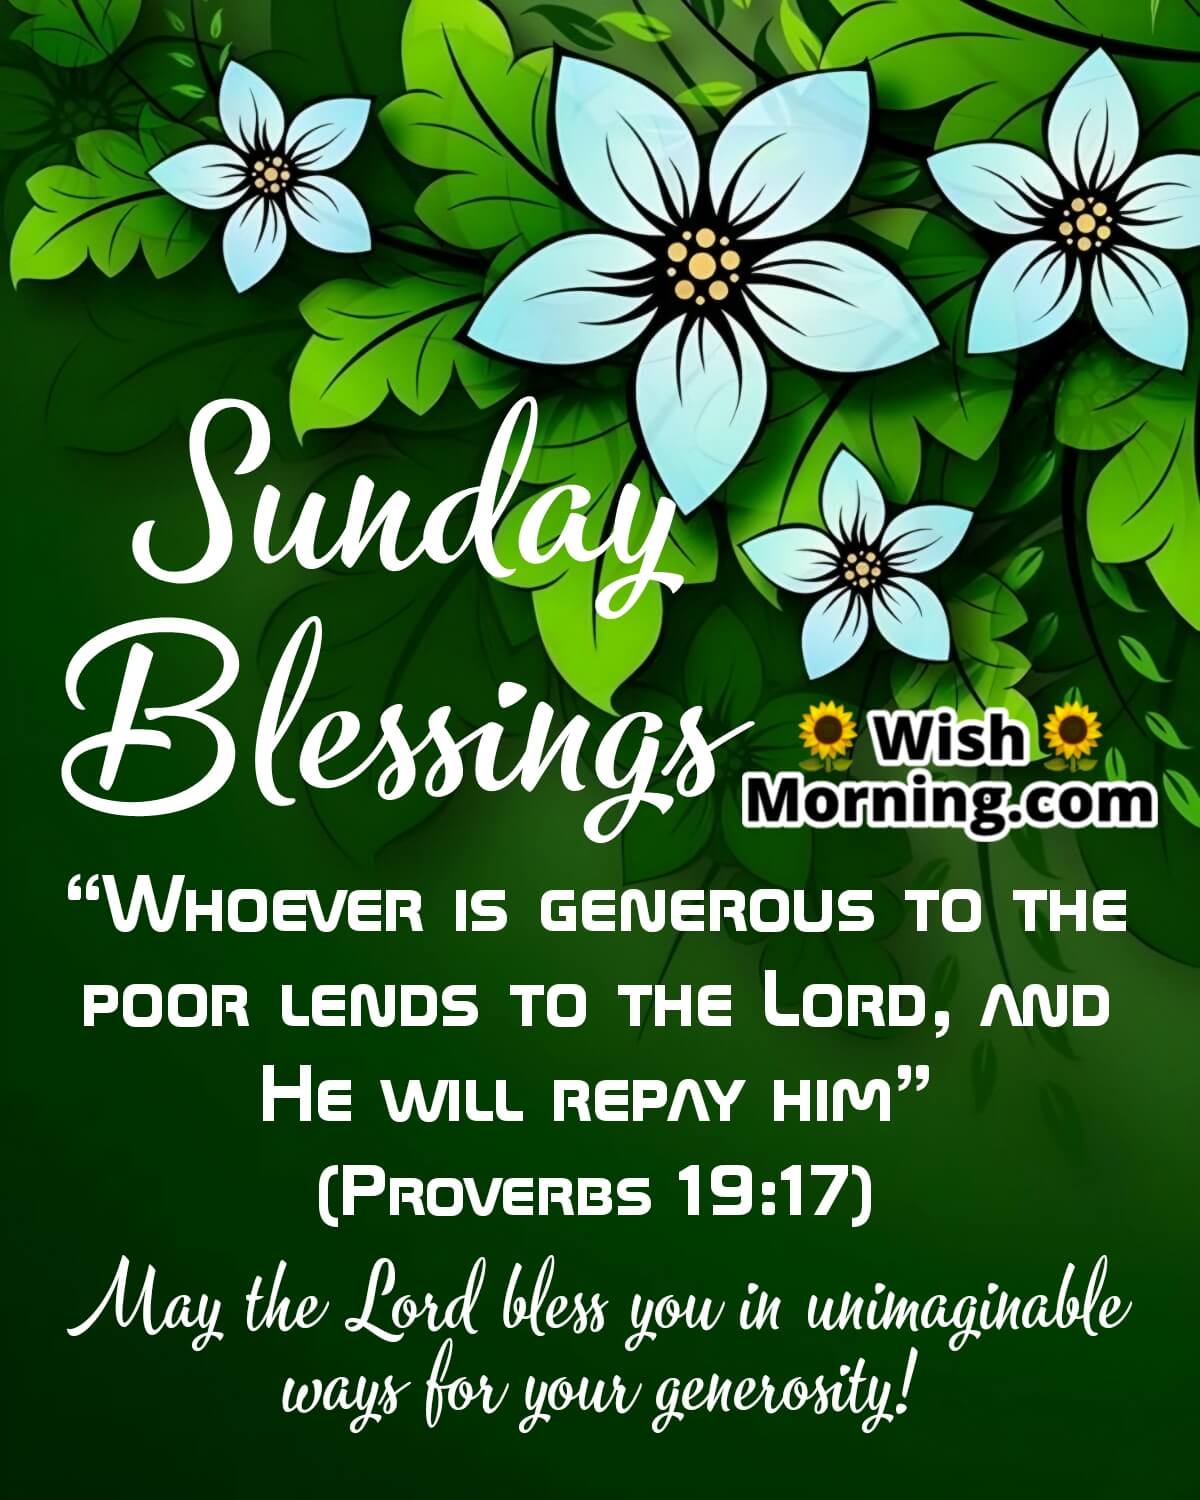 Sunday Blessings Message